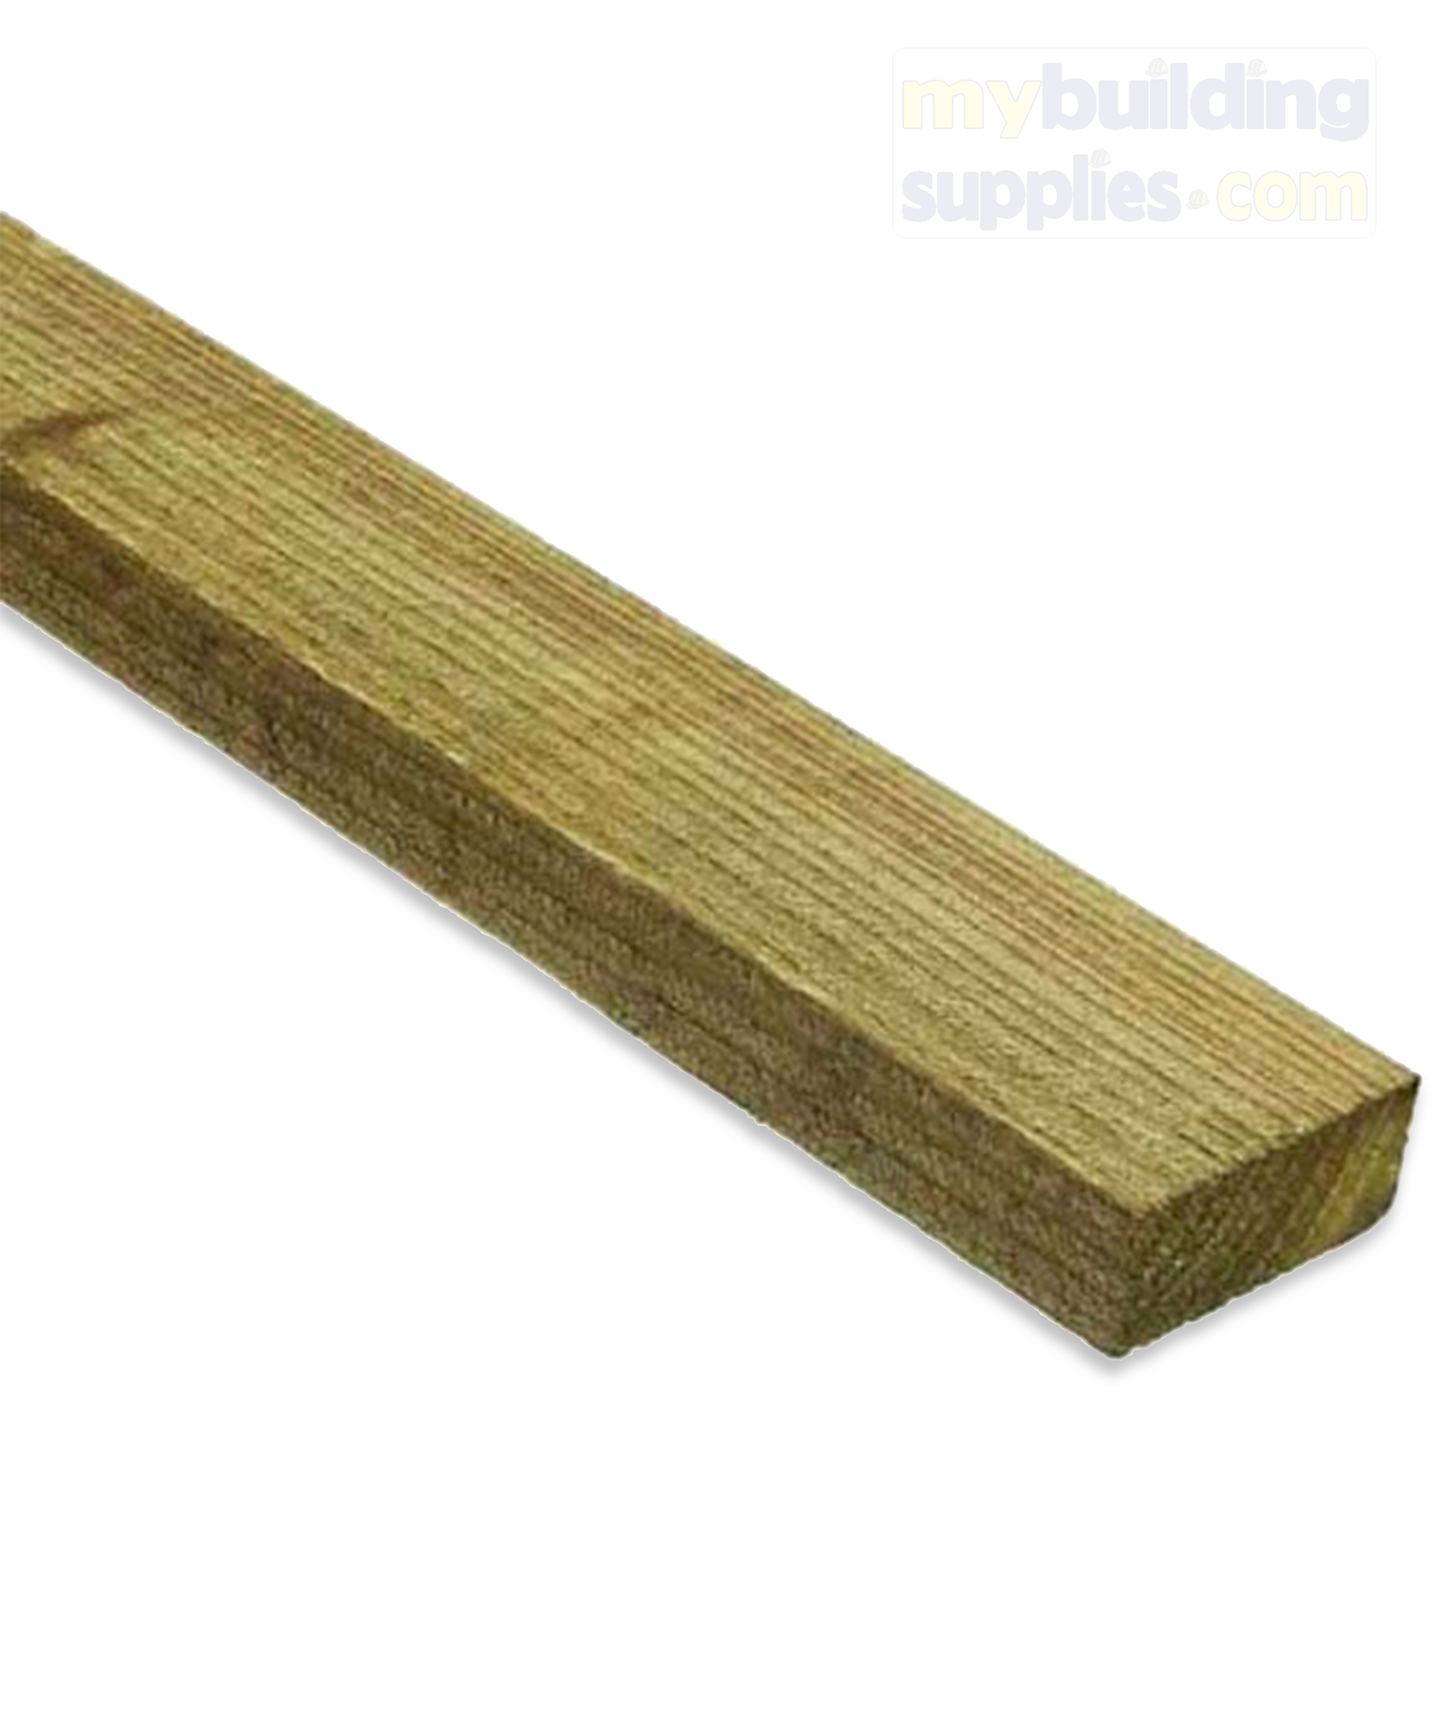 Timber Roofing Lath Batten, 16ft